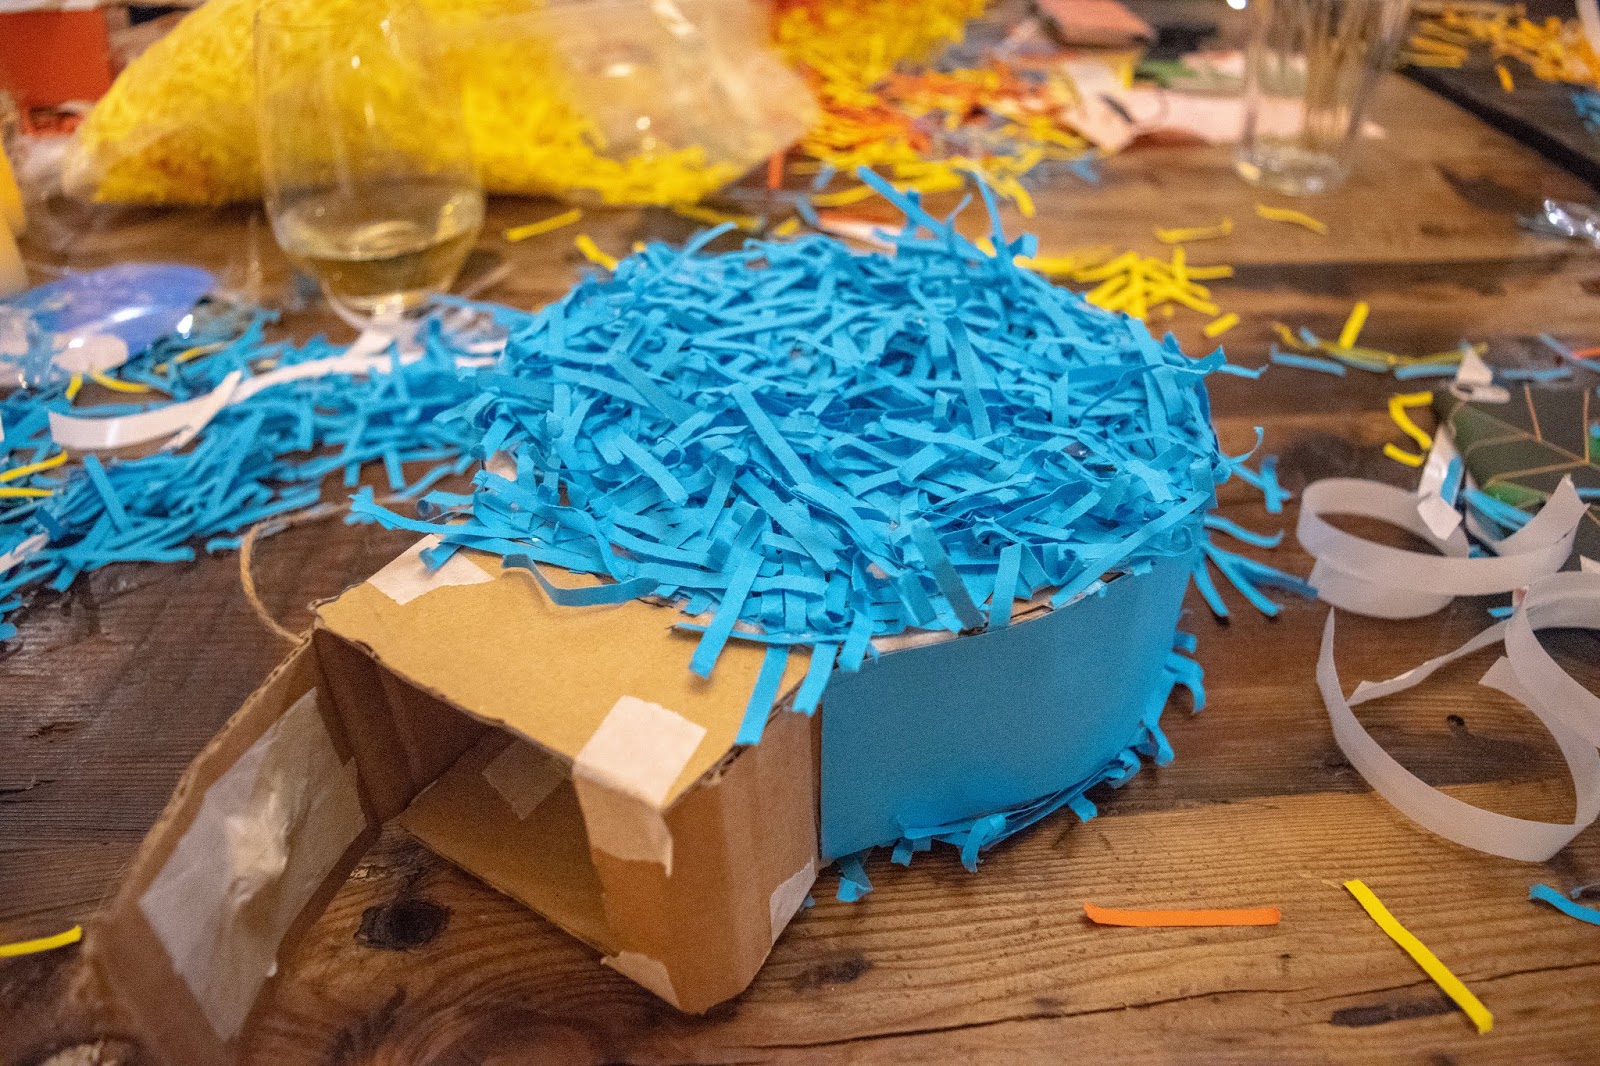 My bauble shaped pinata covered in blue shredded paper.